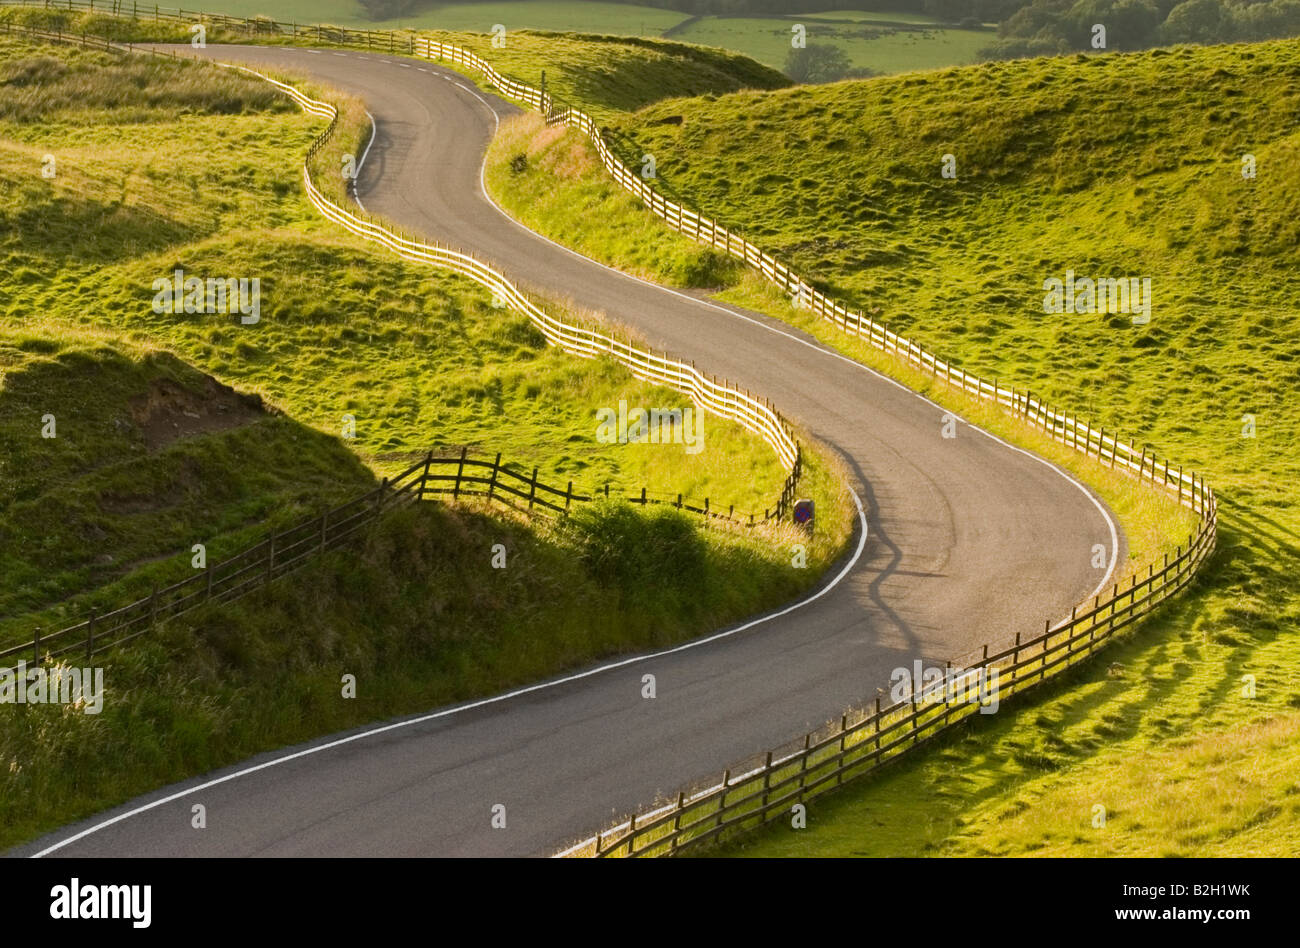 A road winding its way through green hilly landscape Stock Photo